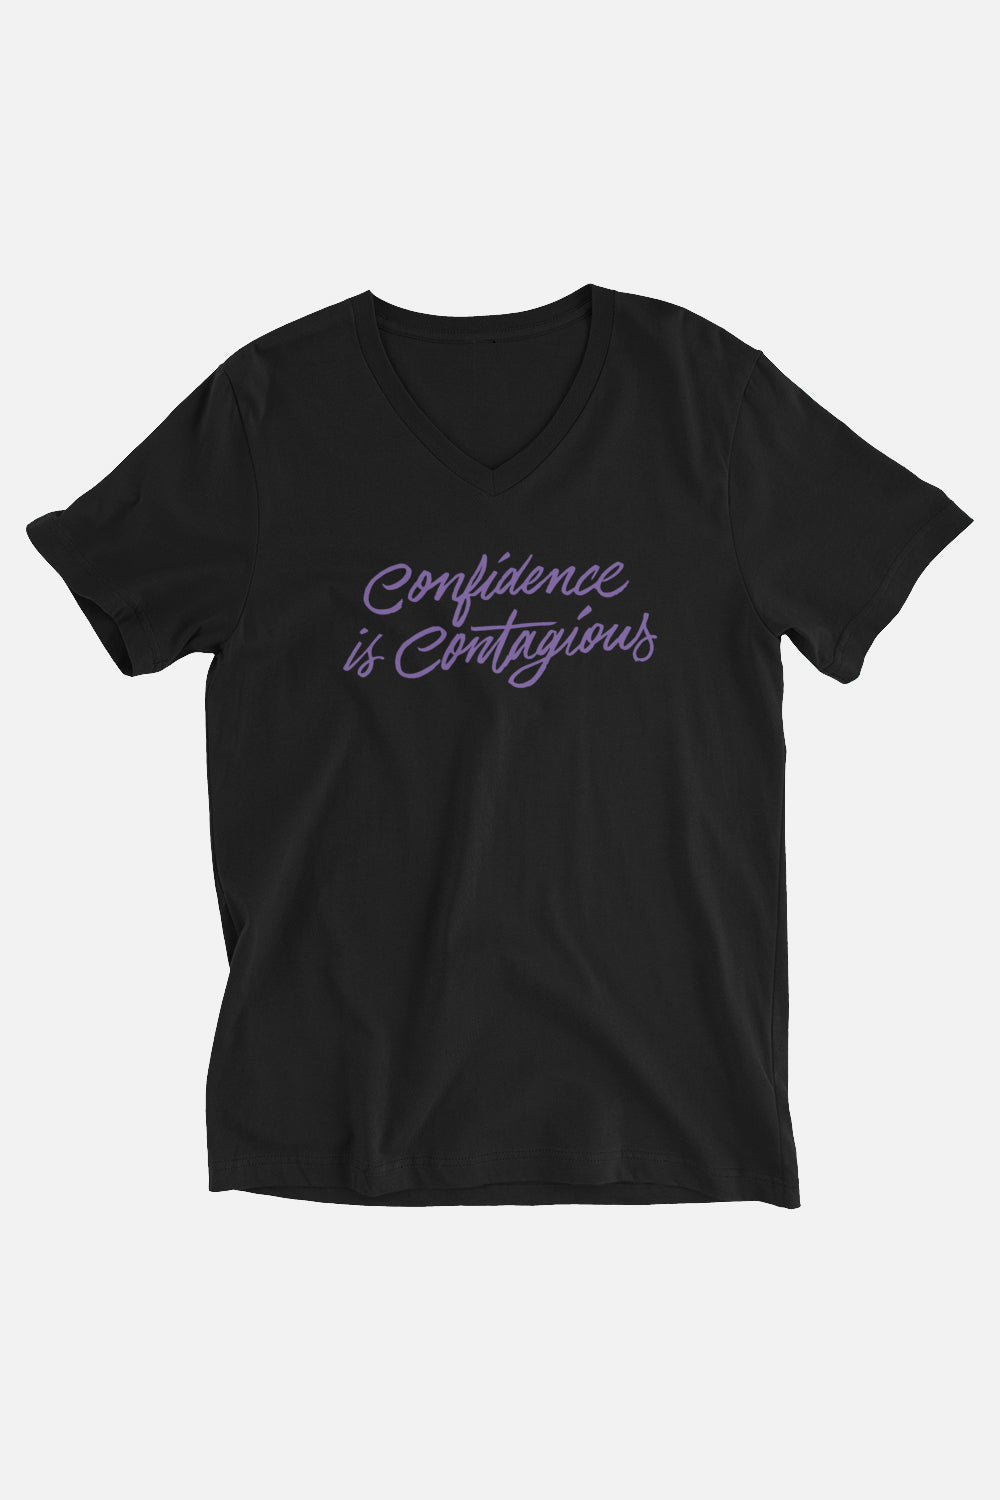 Confidence is Contagious Unisex V-Neck T-Shirt